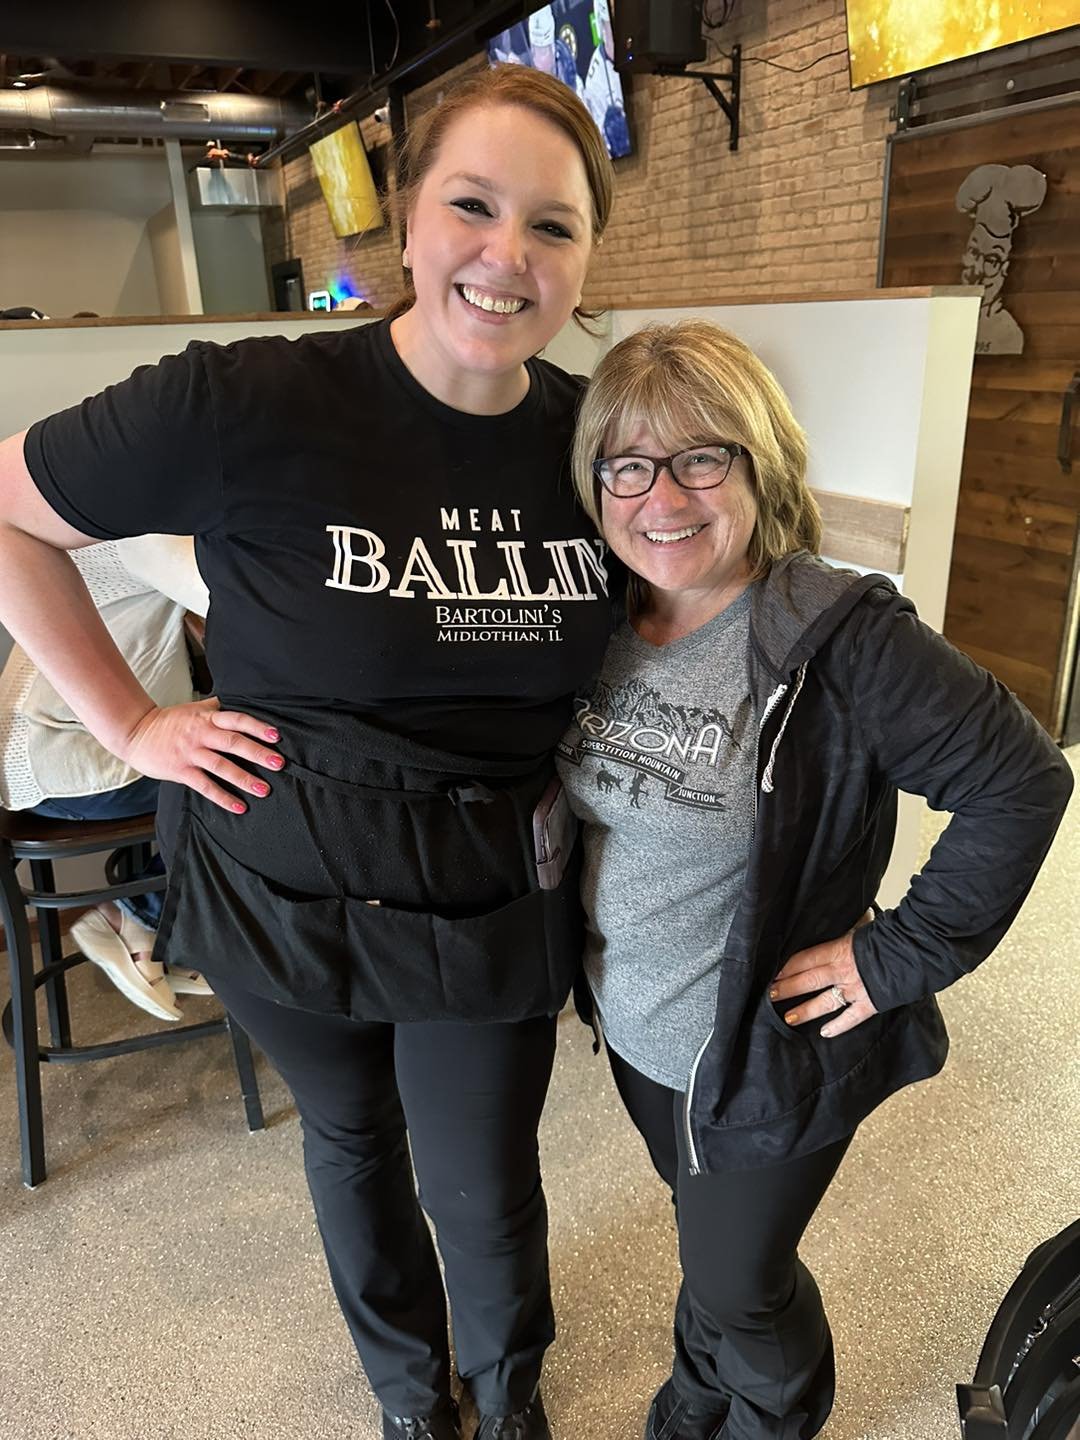 When your 1st Grade teacher comes to BARTOLINI&rsquo;S you stop what you&rsquo;re doing and take a picture with her!!
-Thank you Mrs. Maholovich for bringing your family in for dinner last weekend.
It was great to see you - Thank you for bringing a s